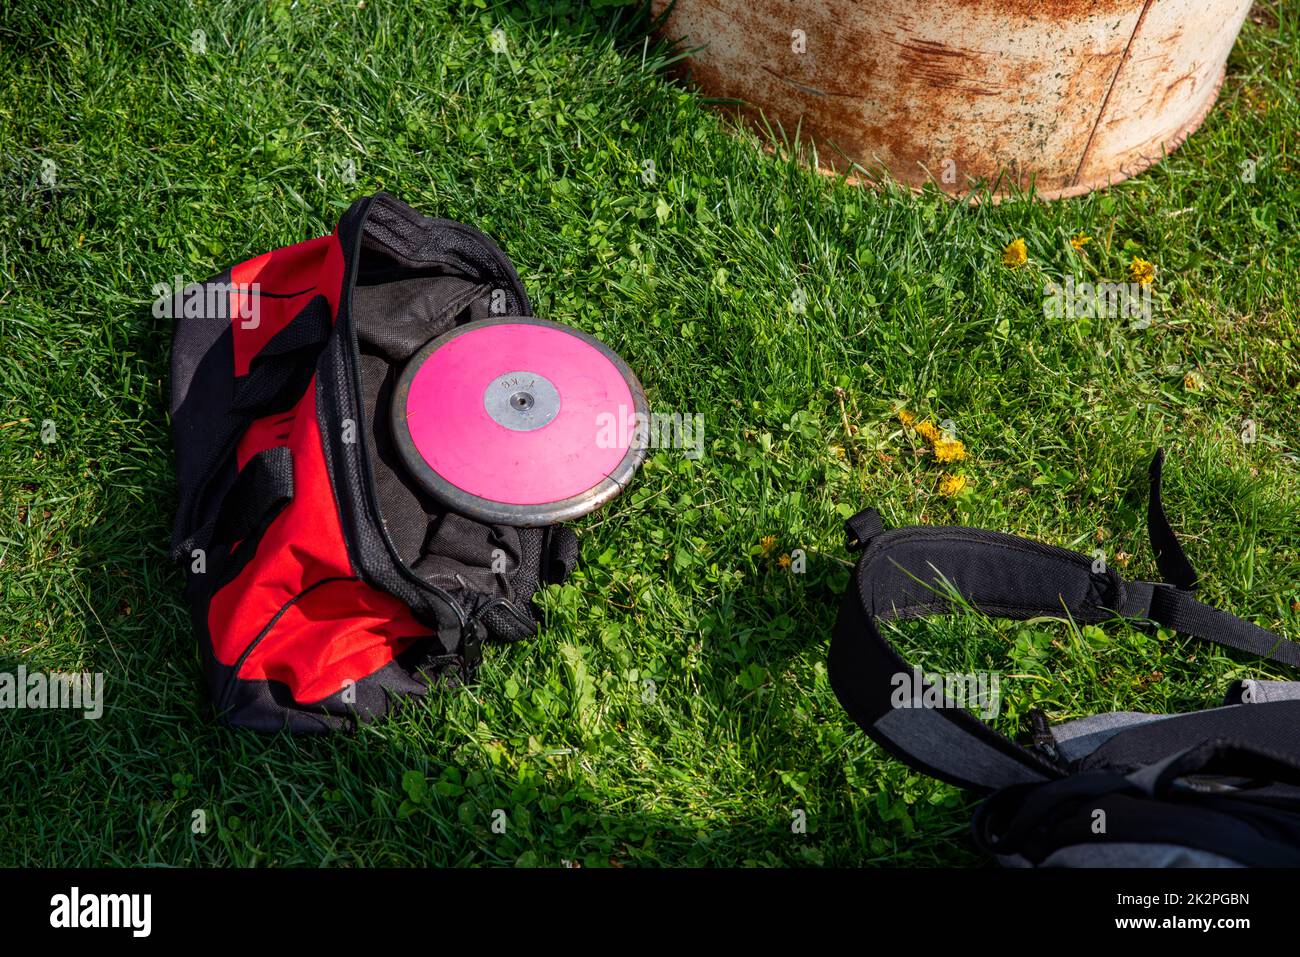 Red athletic equipment bag on the grass with pink track and field discus Stock Photo